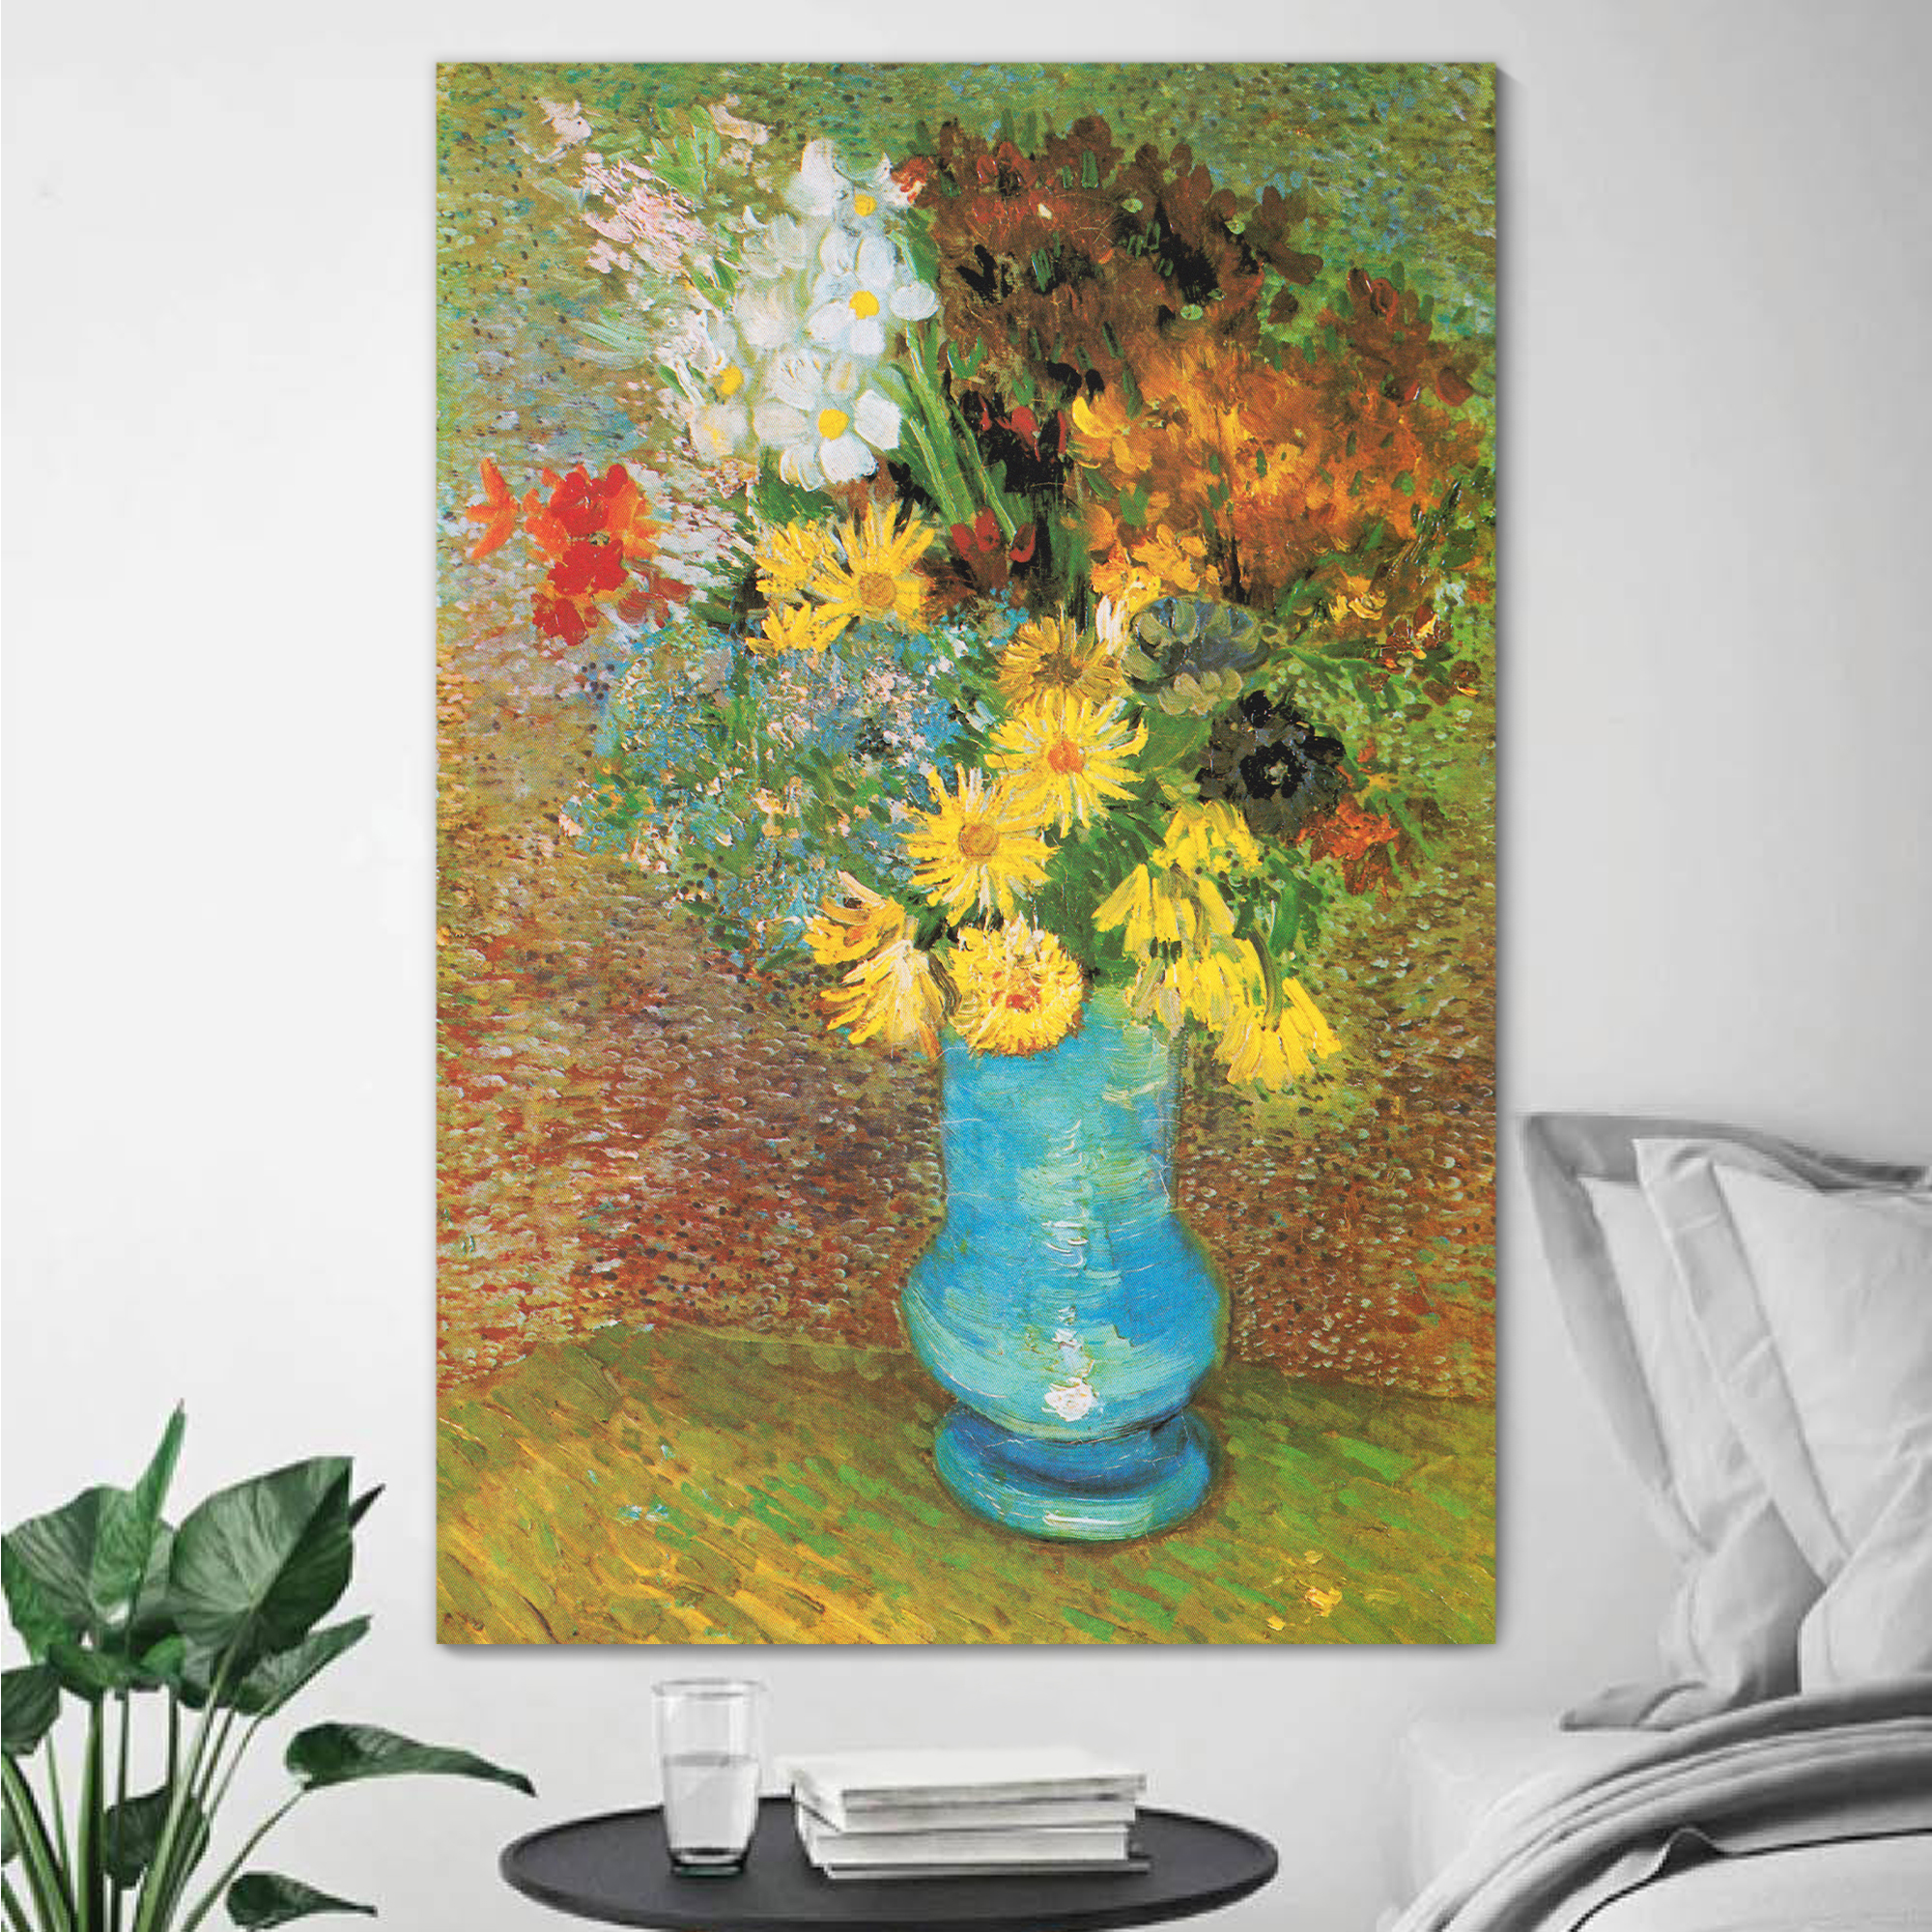 Flowers in a Blue Vase, 1887 by Vincent Van Gogh - Canvas Print Wall Art Famous Oil Painting Reproduction - 16